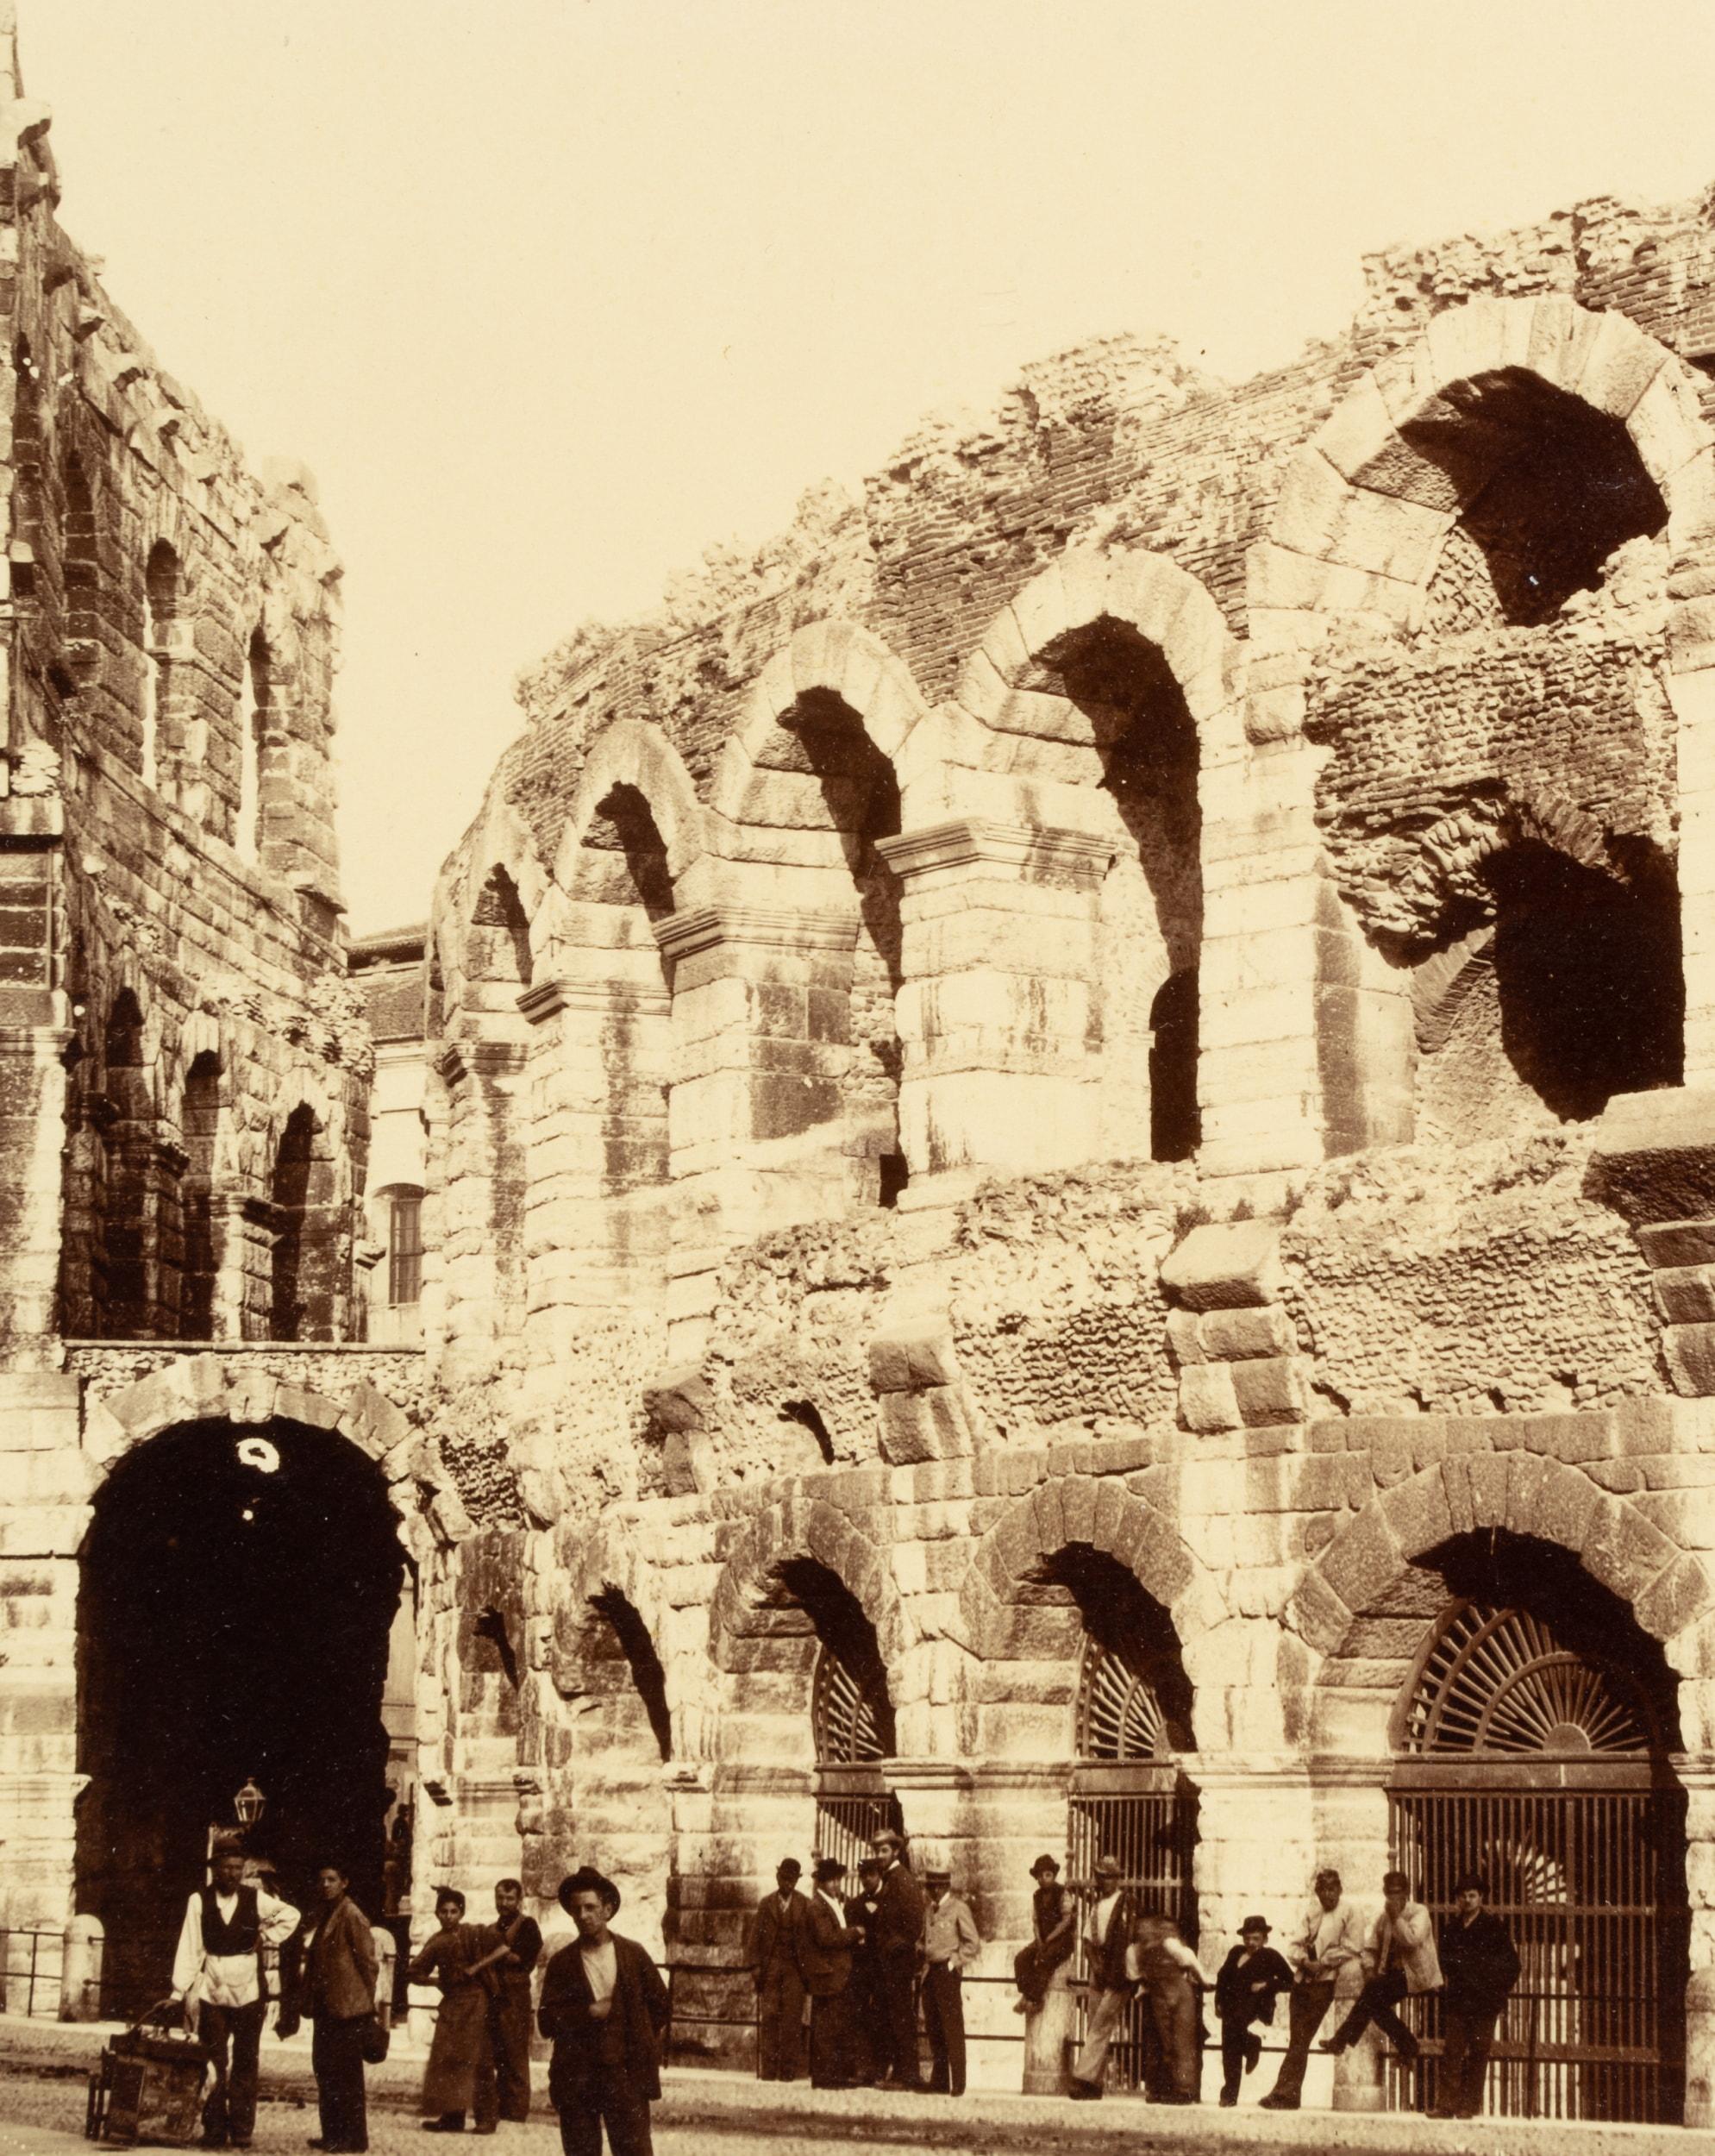 V. Florianello (19th century): In front of the walls of the Arena in Verona With passers-by, guides and city dwellers, c. 1880, albumen paper print

Technique: albumen paper print

Inscription: Lower right signed in the printing plate: 